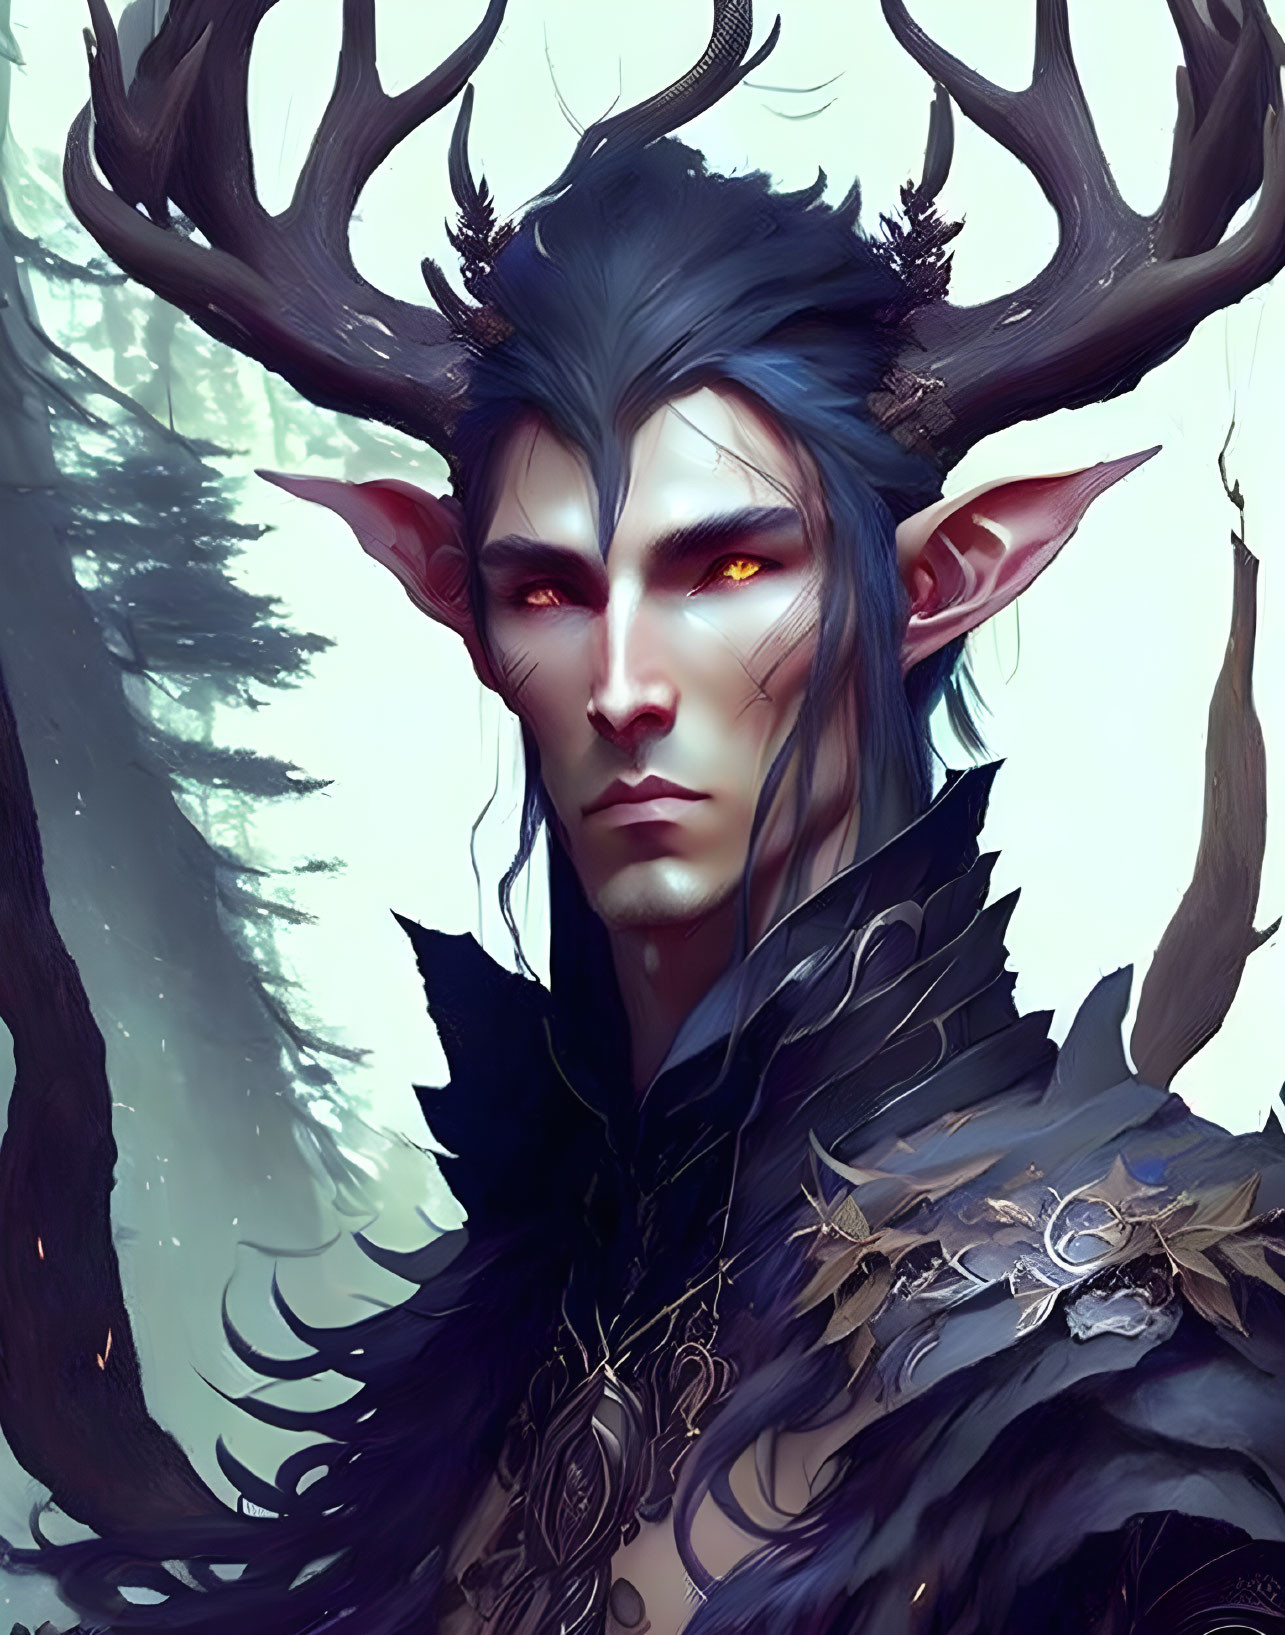 Fantasy character with antler-like horns in dark armor among misty forest